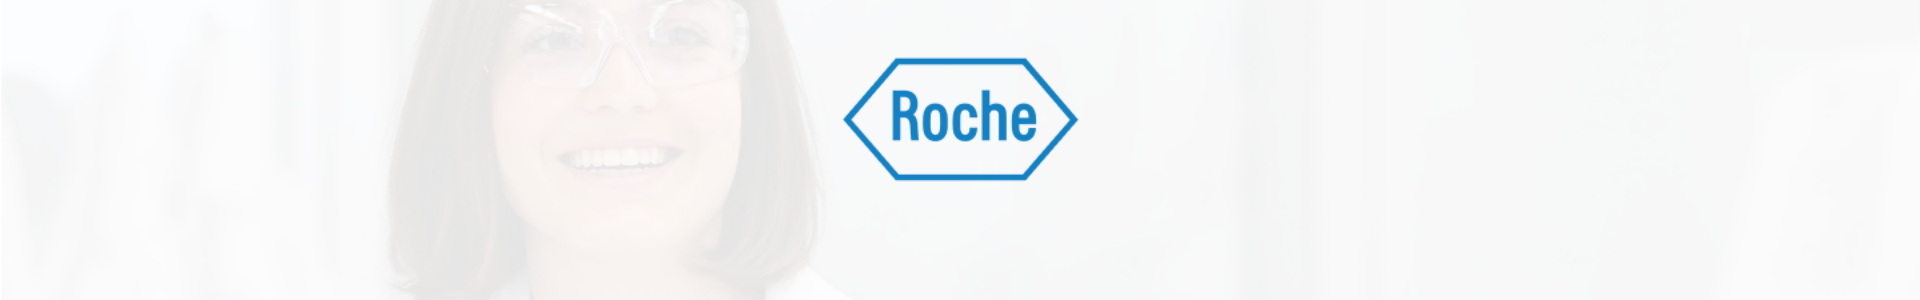 Roche - first image